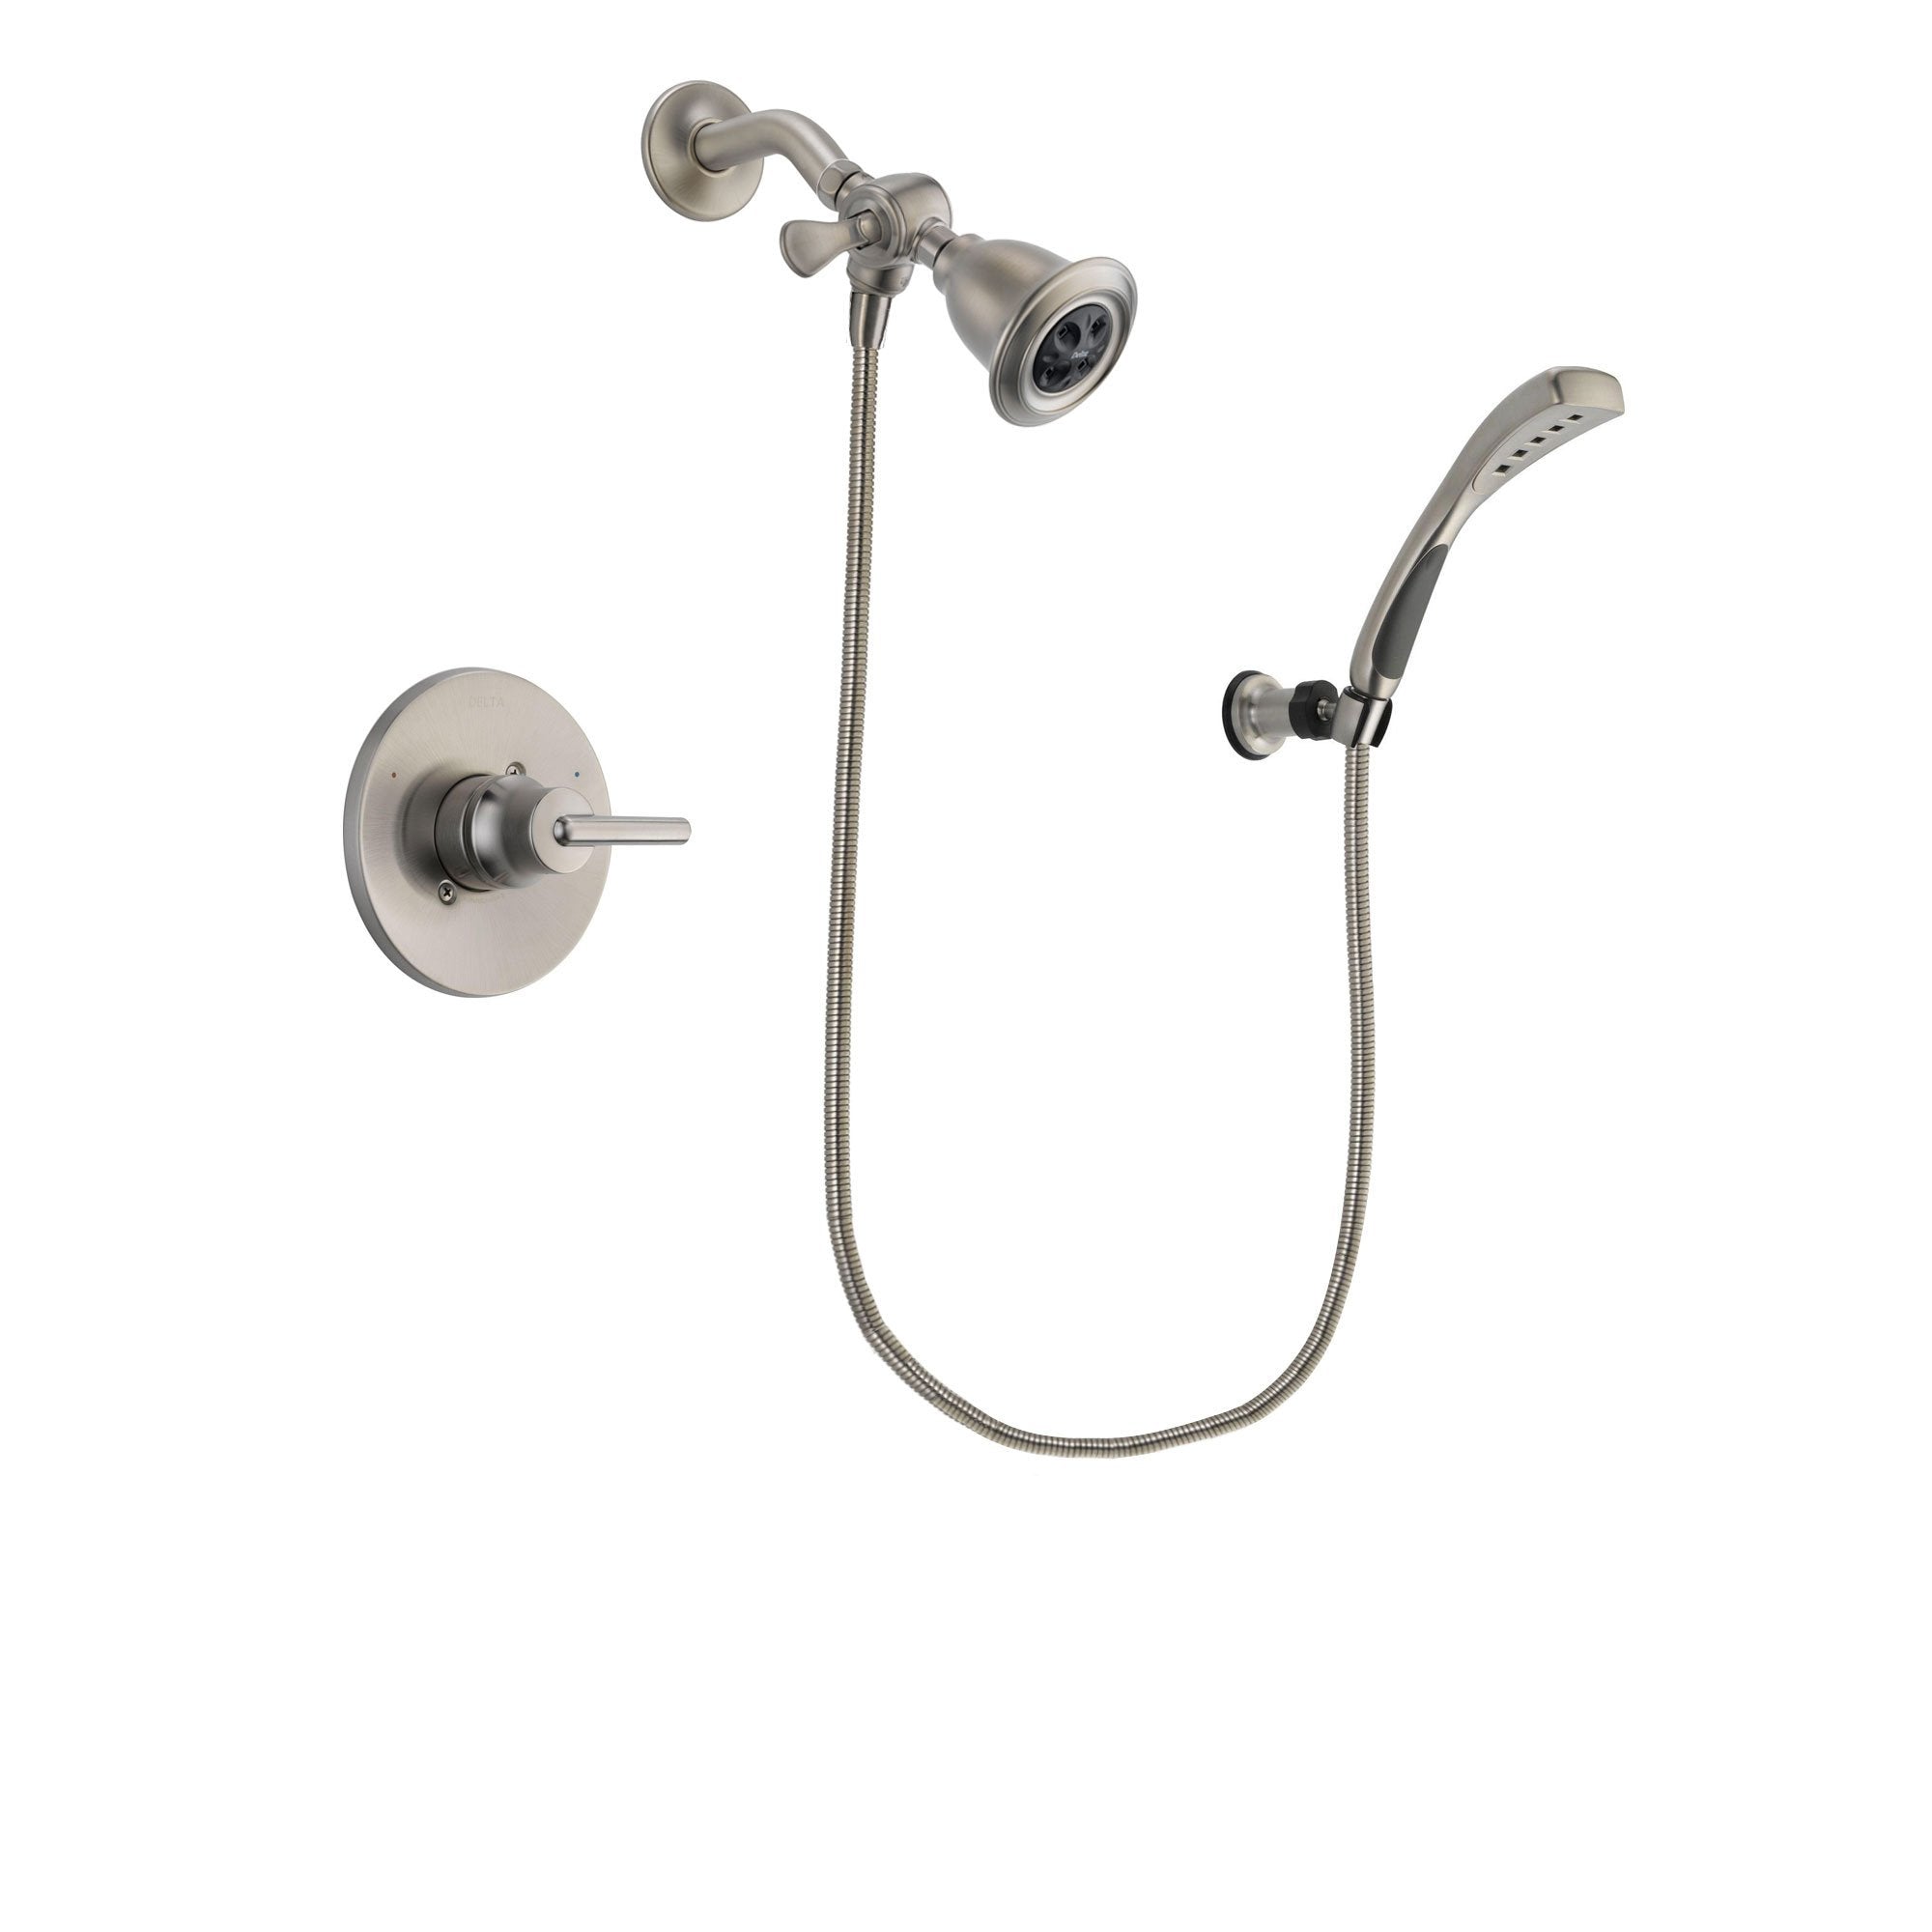 Delta Trinsic Stainless Steel Finish Shower Faucet System Package with Water Efficient Showerhead and Wall Mounted Handshower Includes Rough-in Valve DSP1832V